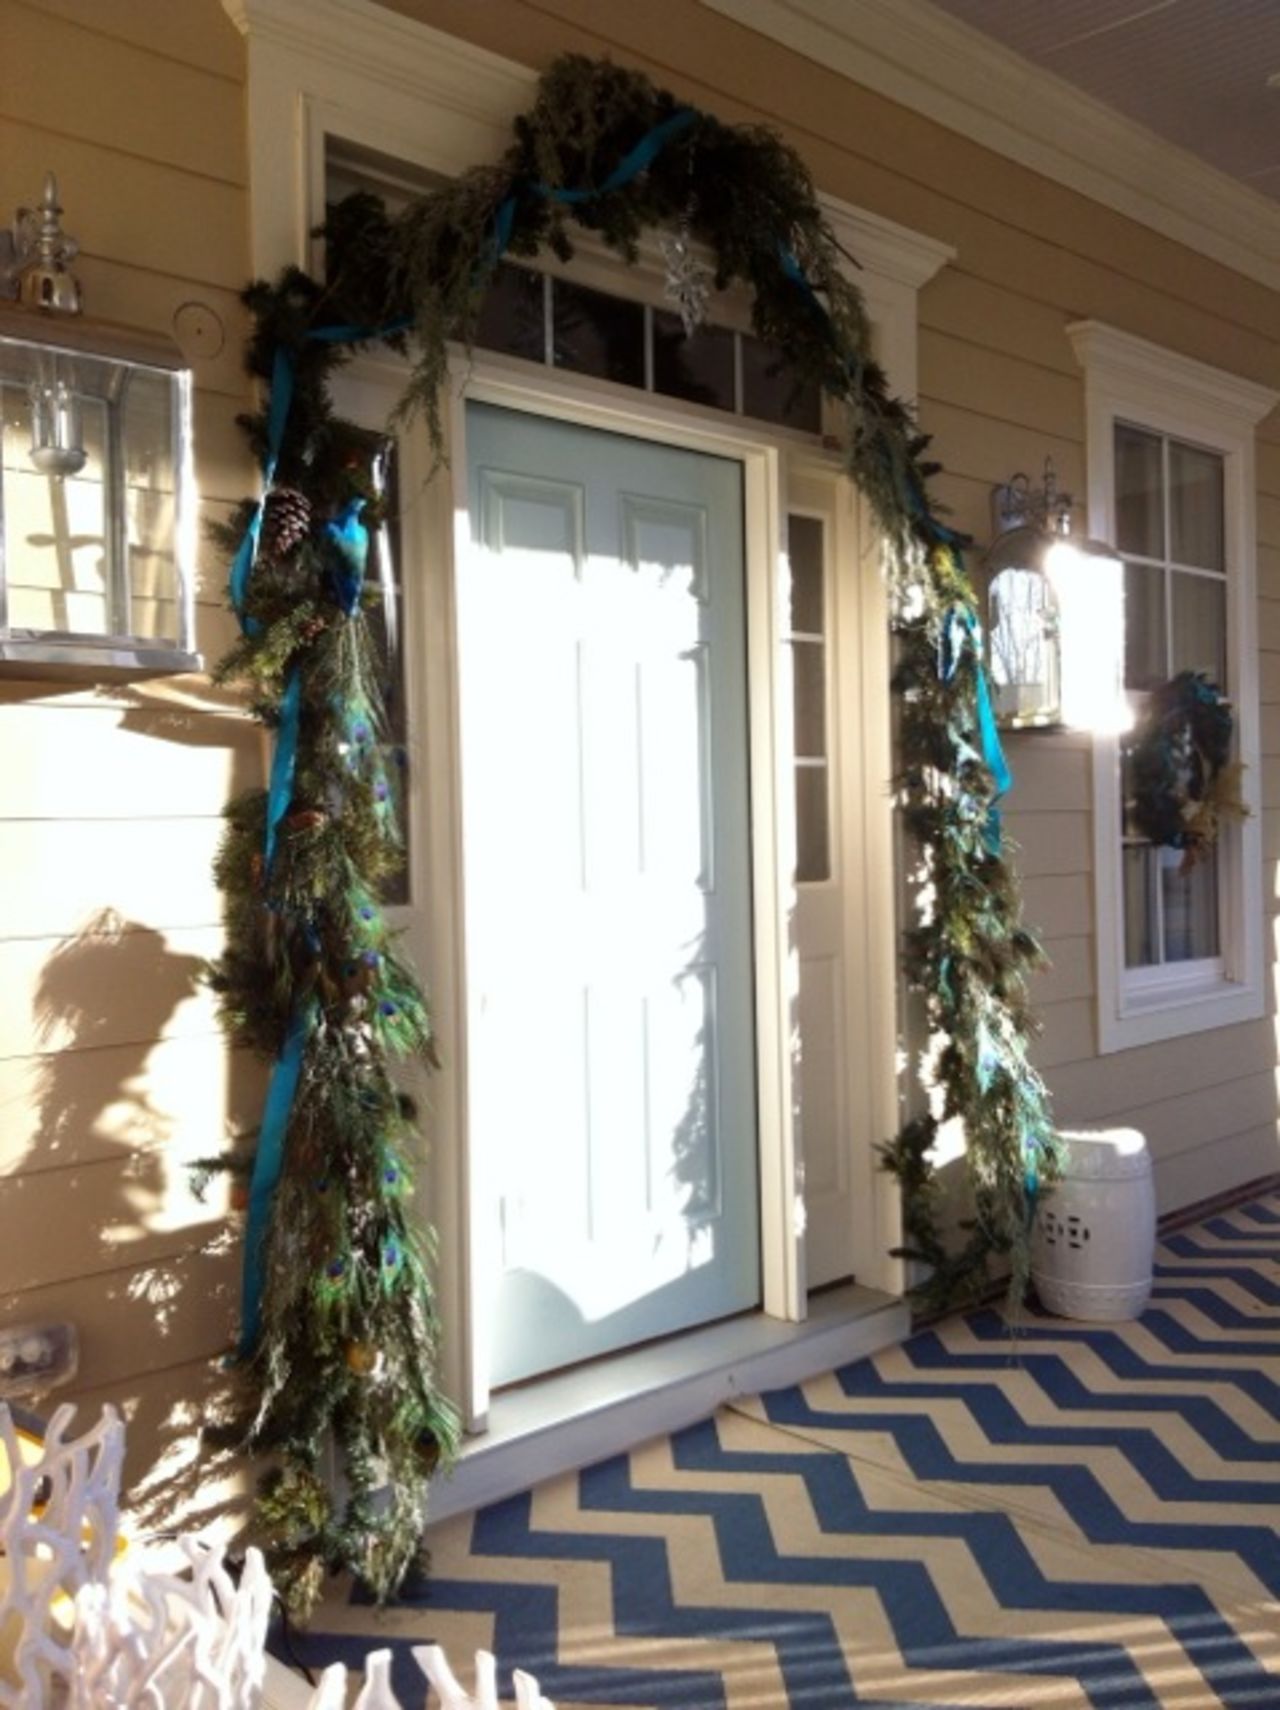 Norwood's front door gives a decorating hint to what's inside the house.